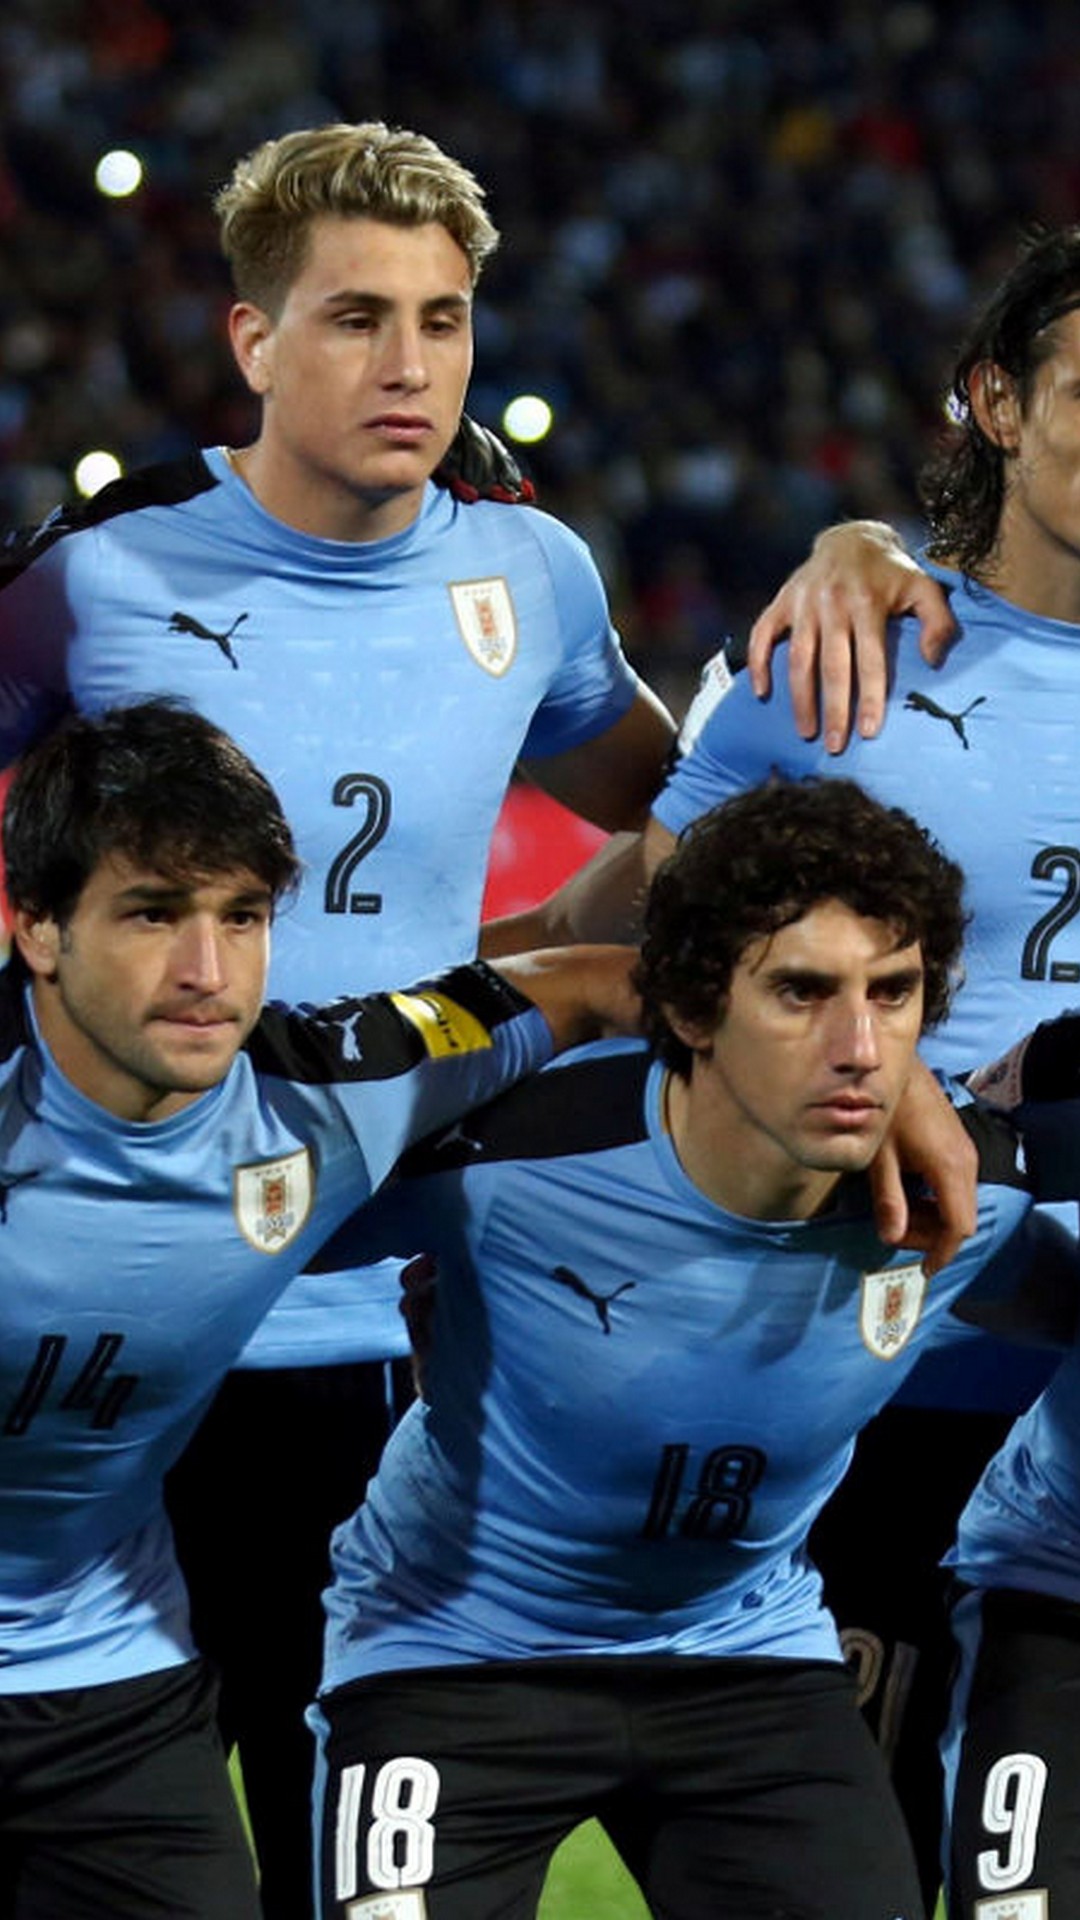 Uruguay National Team Wallpaper For Android with image resolution 1080x1920 pixel. You can make this wallpaper for your Android backgrounds, Tablet, Smartphones Screensavers and Mobile Phone Lock Screen